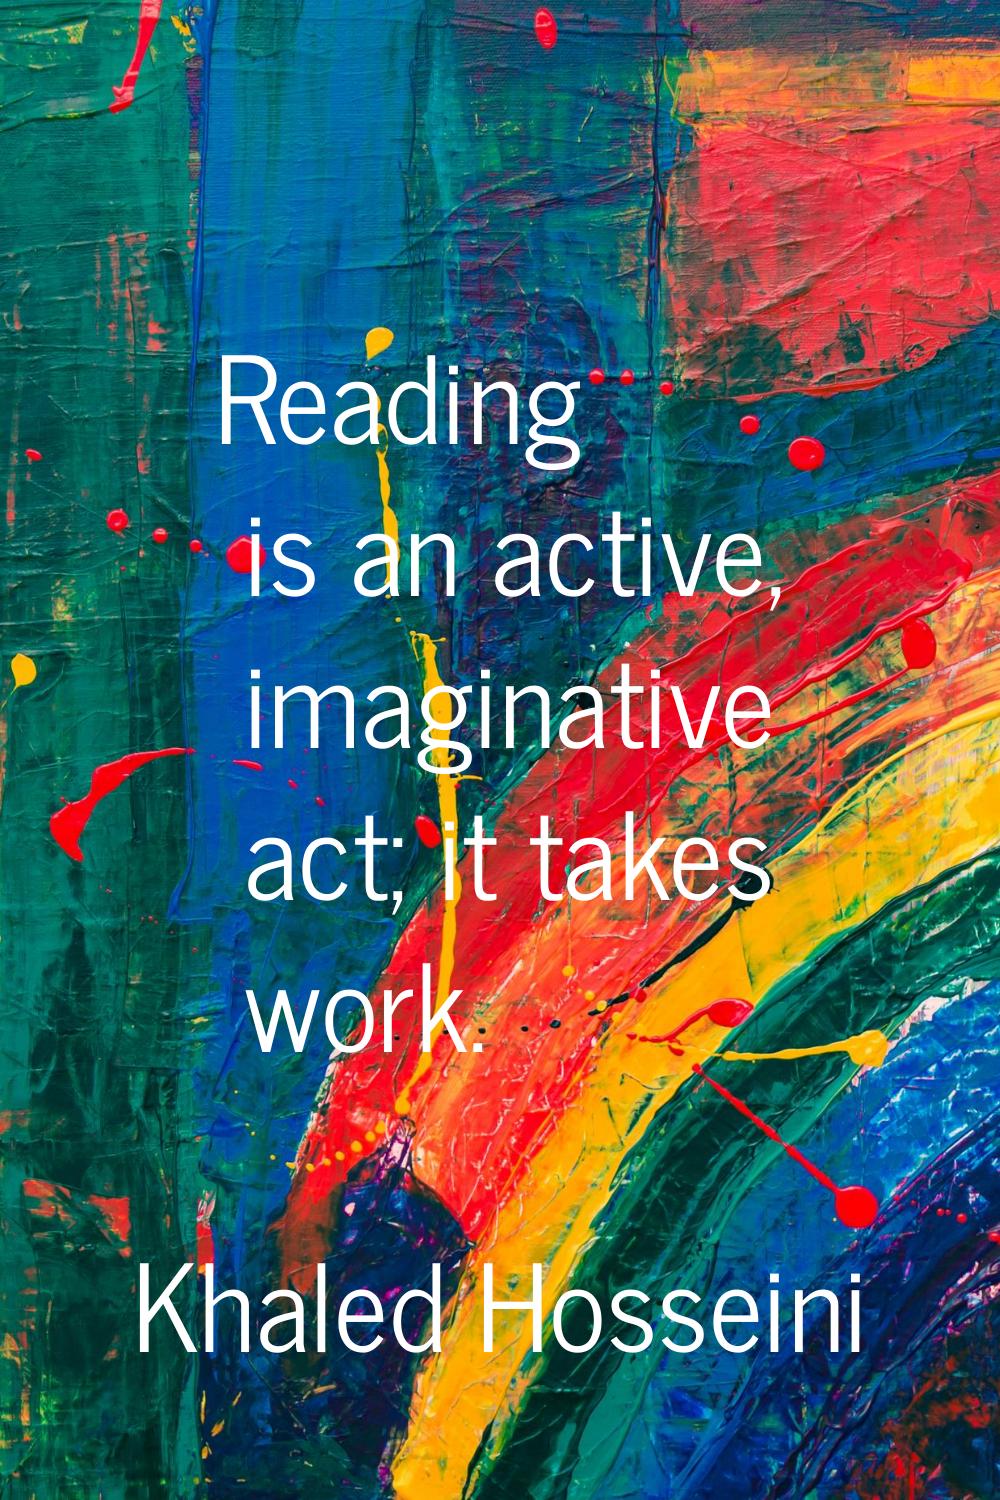 Reading is an active, imaginative act; it takes work.